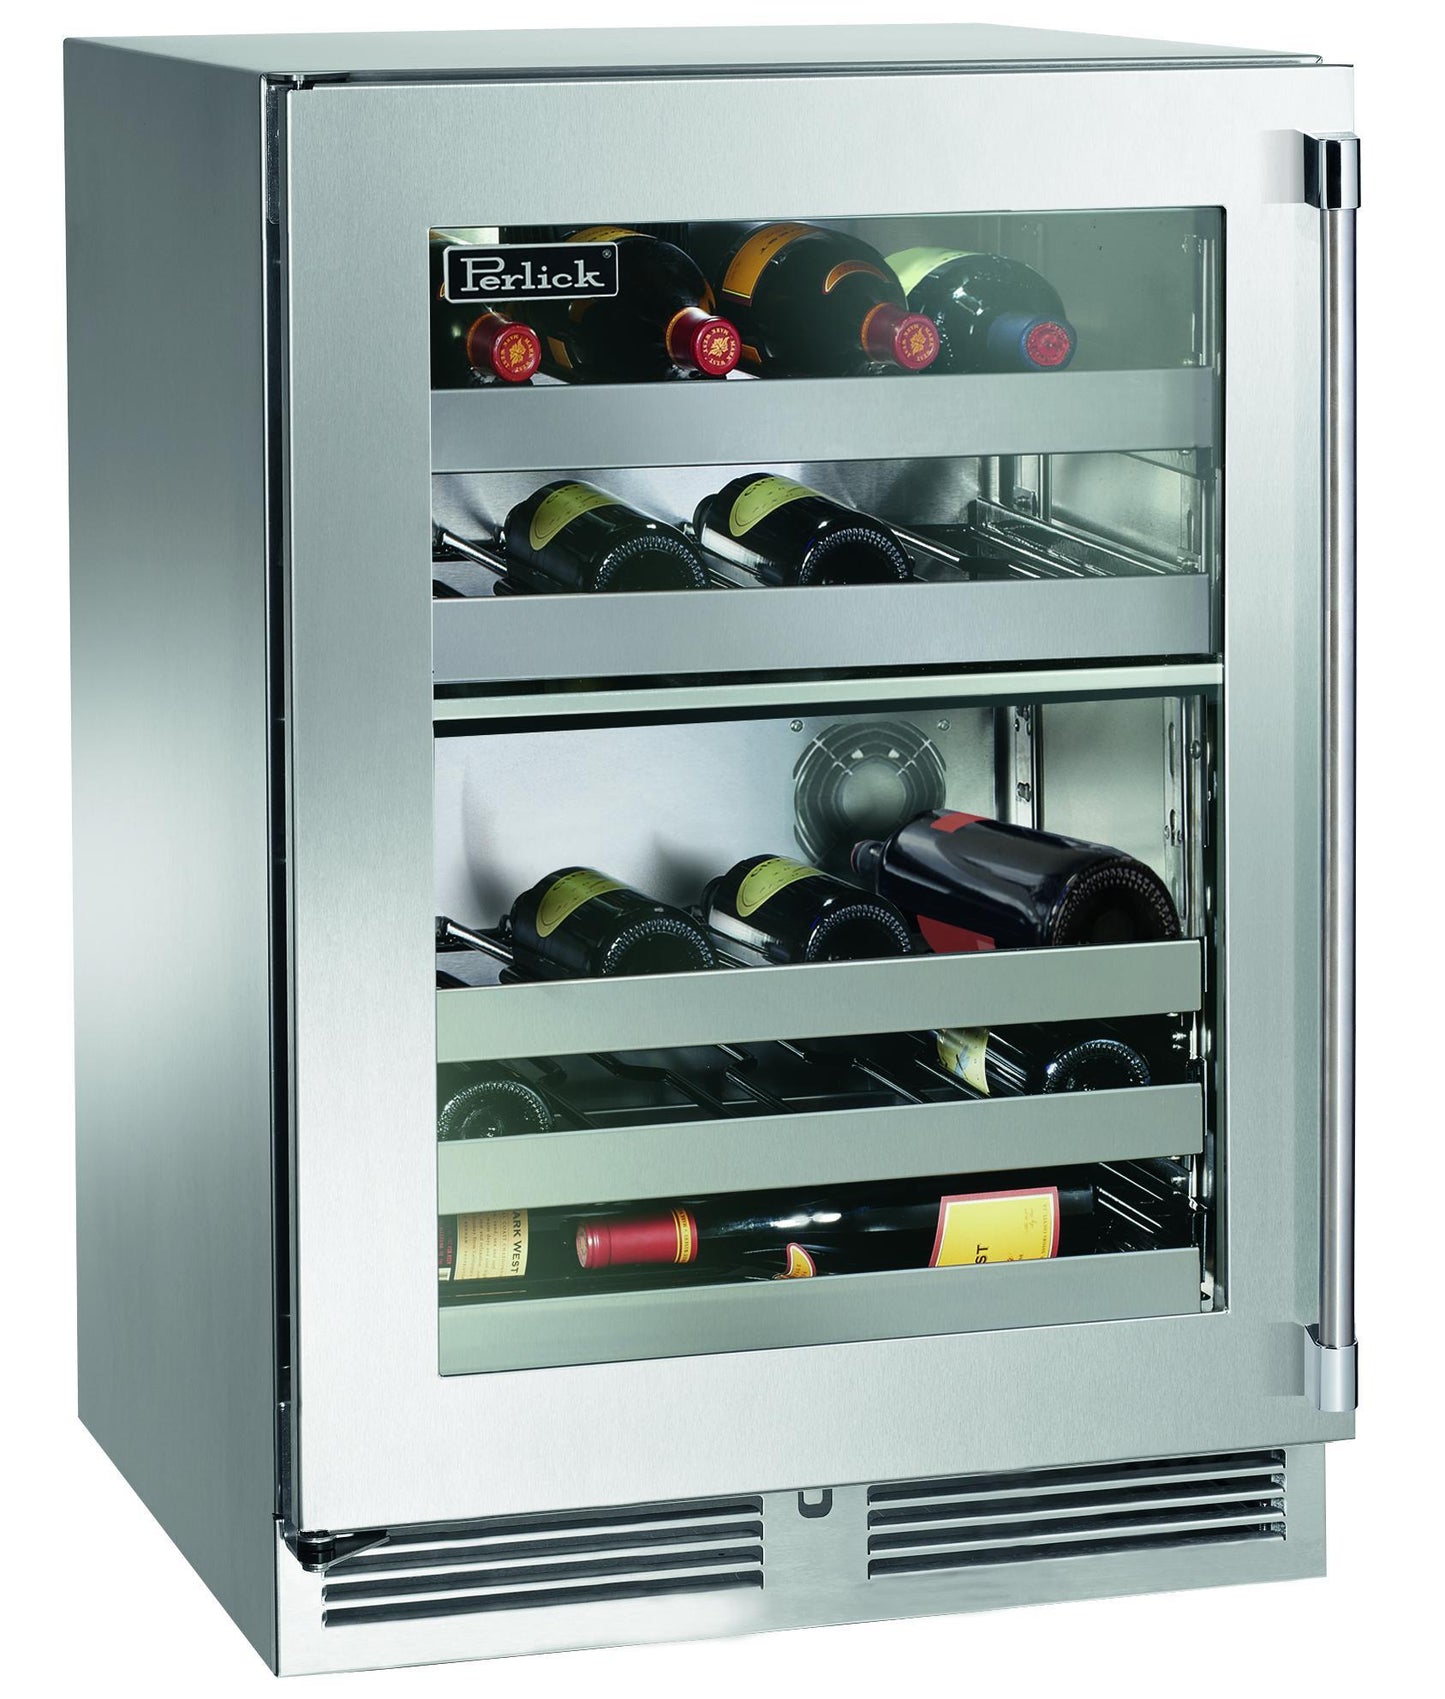 Perlick HP24DS43R 24" Dual-Zone Wine Reserve